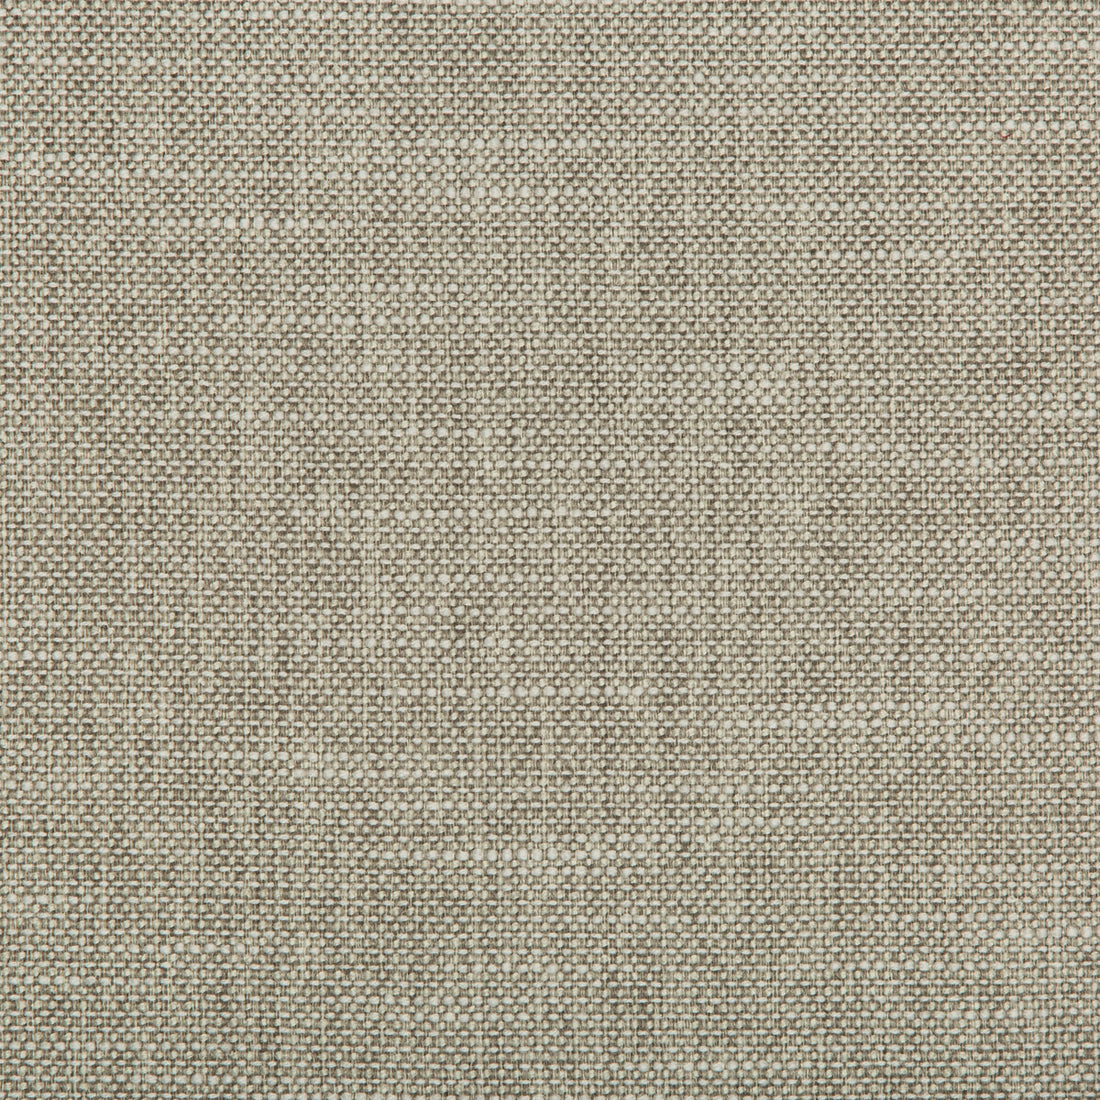 Heyward fabric in pumice color - pattern 35746.11.0 - by Kravet Contract in the Value Kravetarmor collection